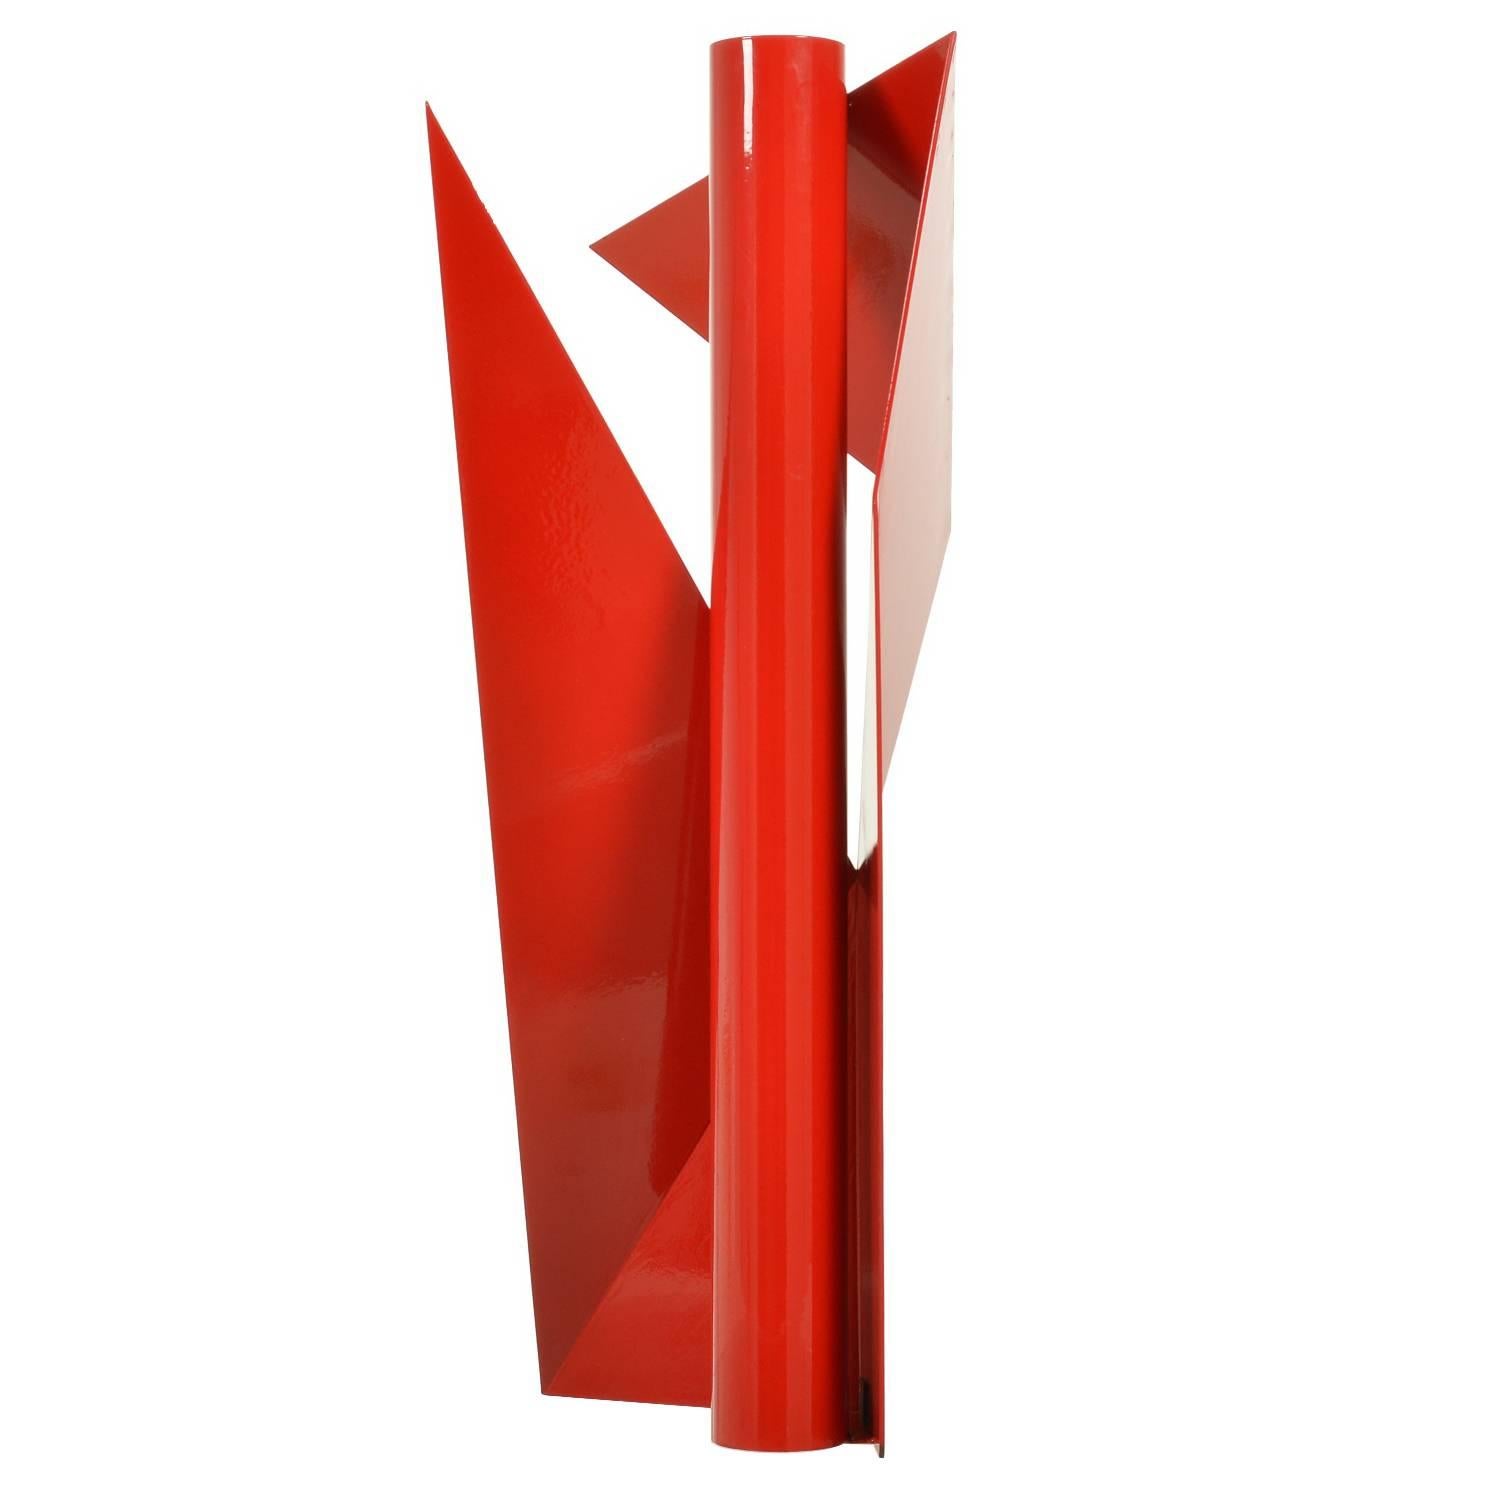 Alas II Steel Geometeric Sculpture by Betty Gold For Sale